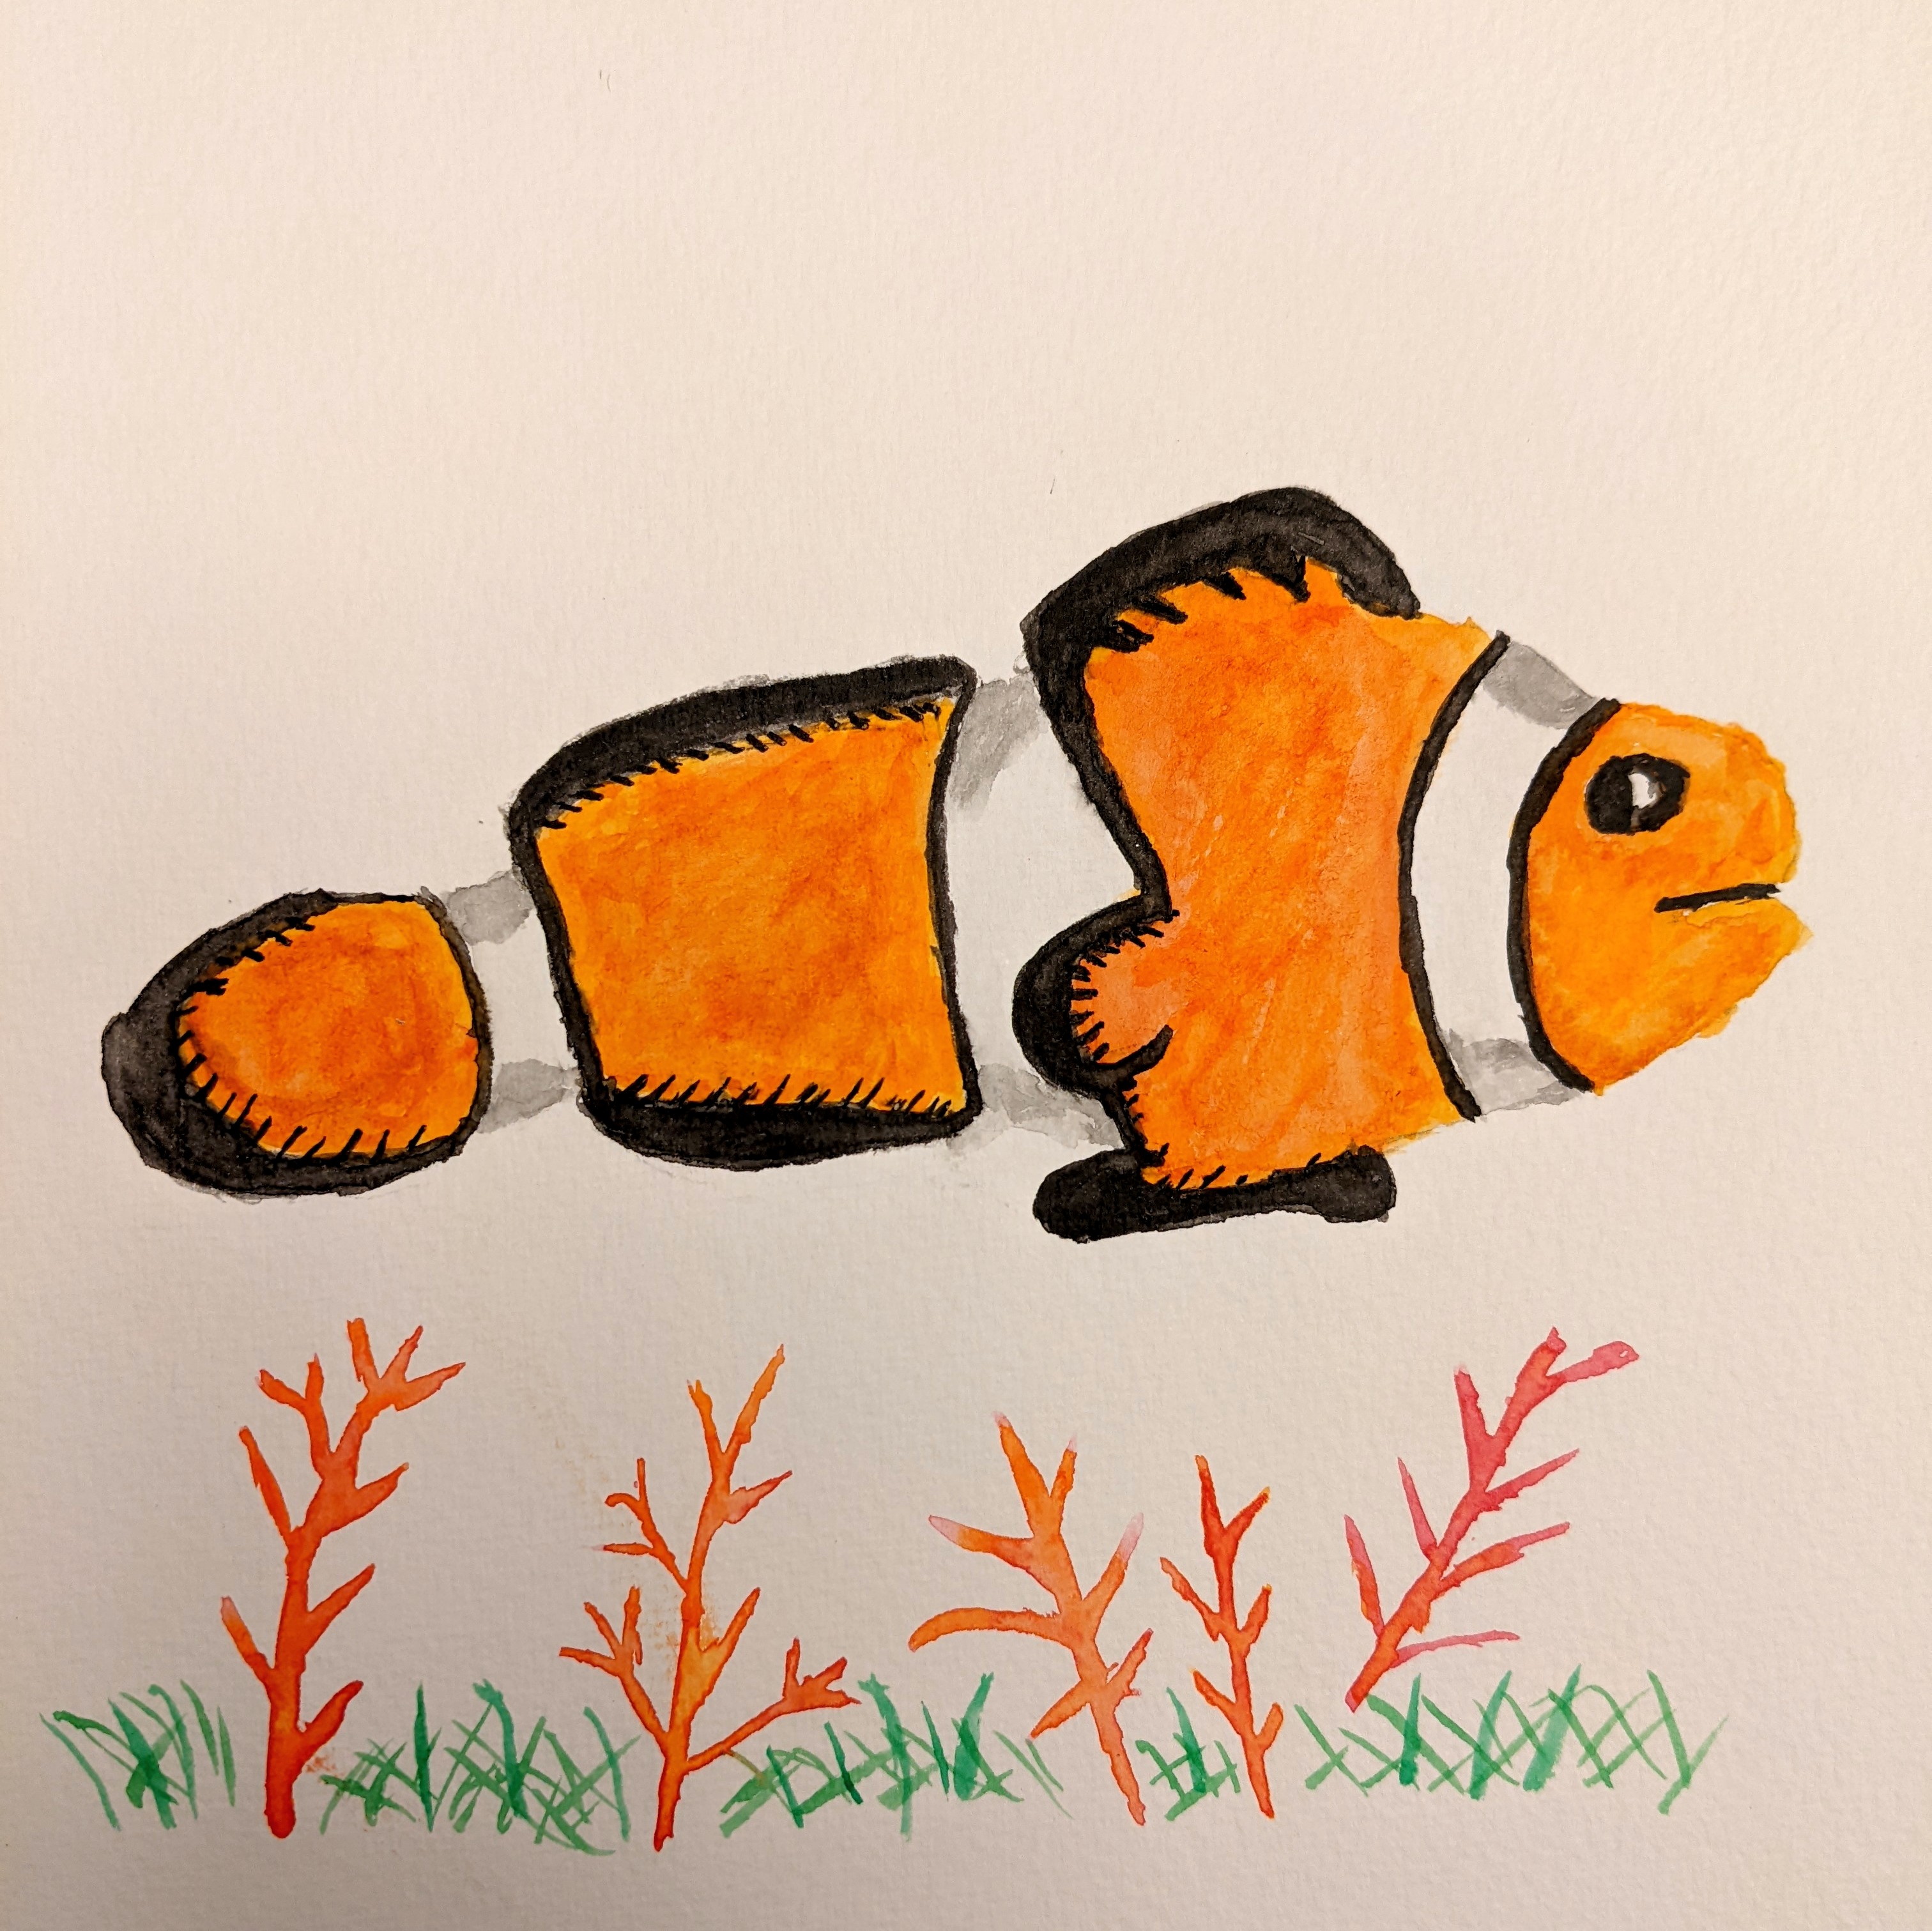 Watercolor painting of a clowfish like Nemo on white paper with some grass tufts along the bottom